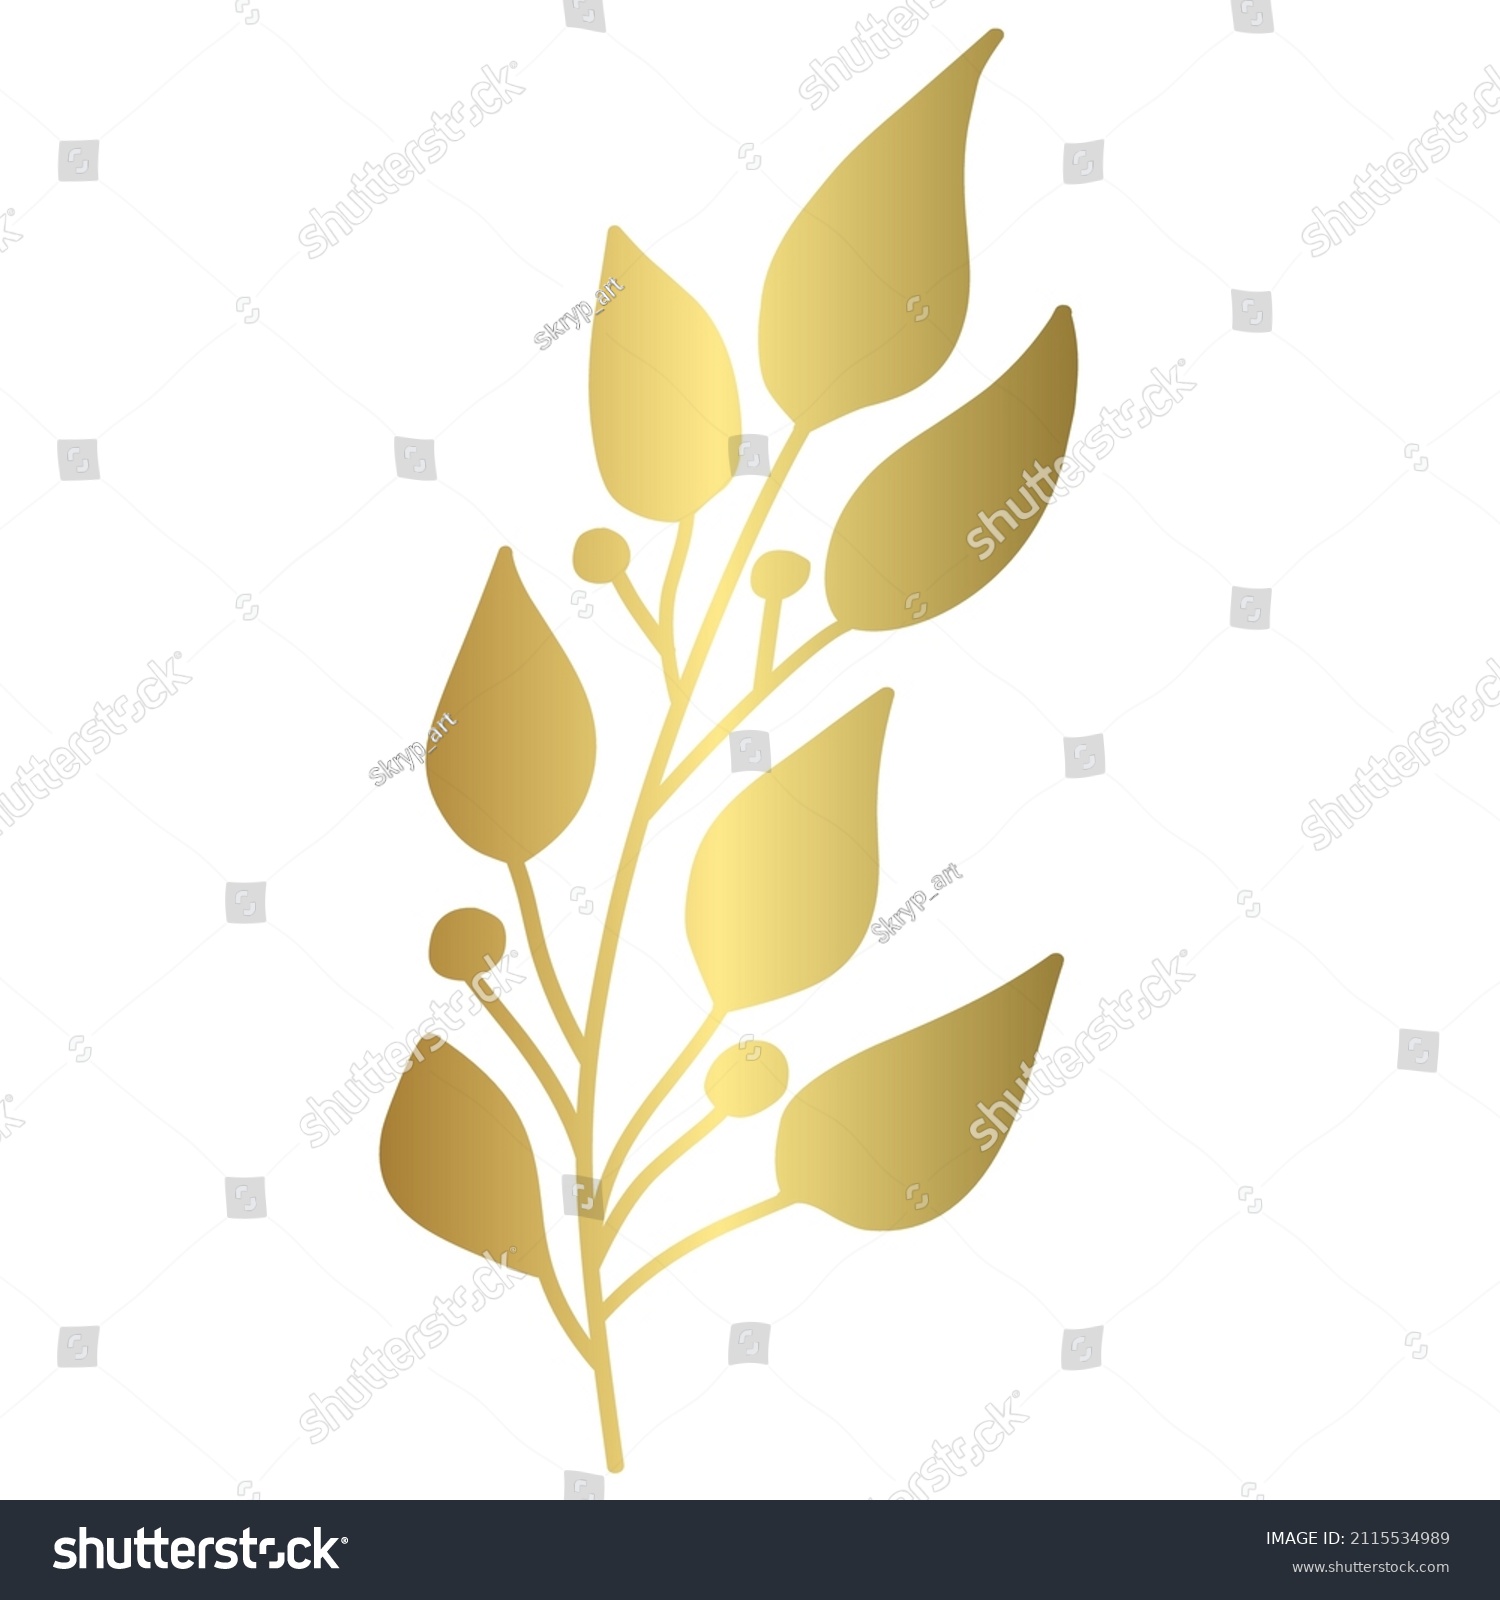 SVG of Decorative branch with golden leaves and berries. Plant with color gradient isolated on white background. Vector illustration. svg